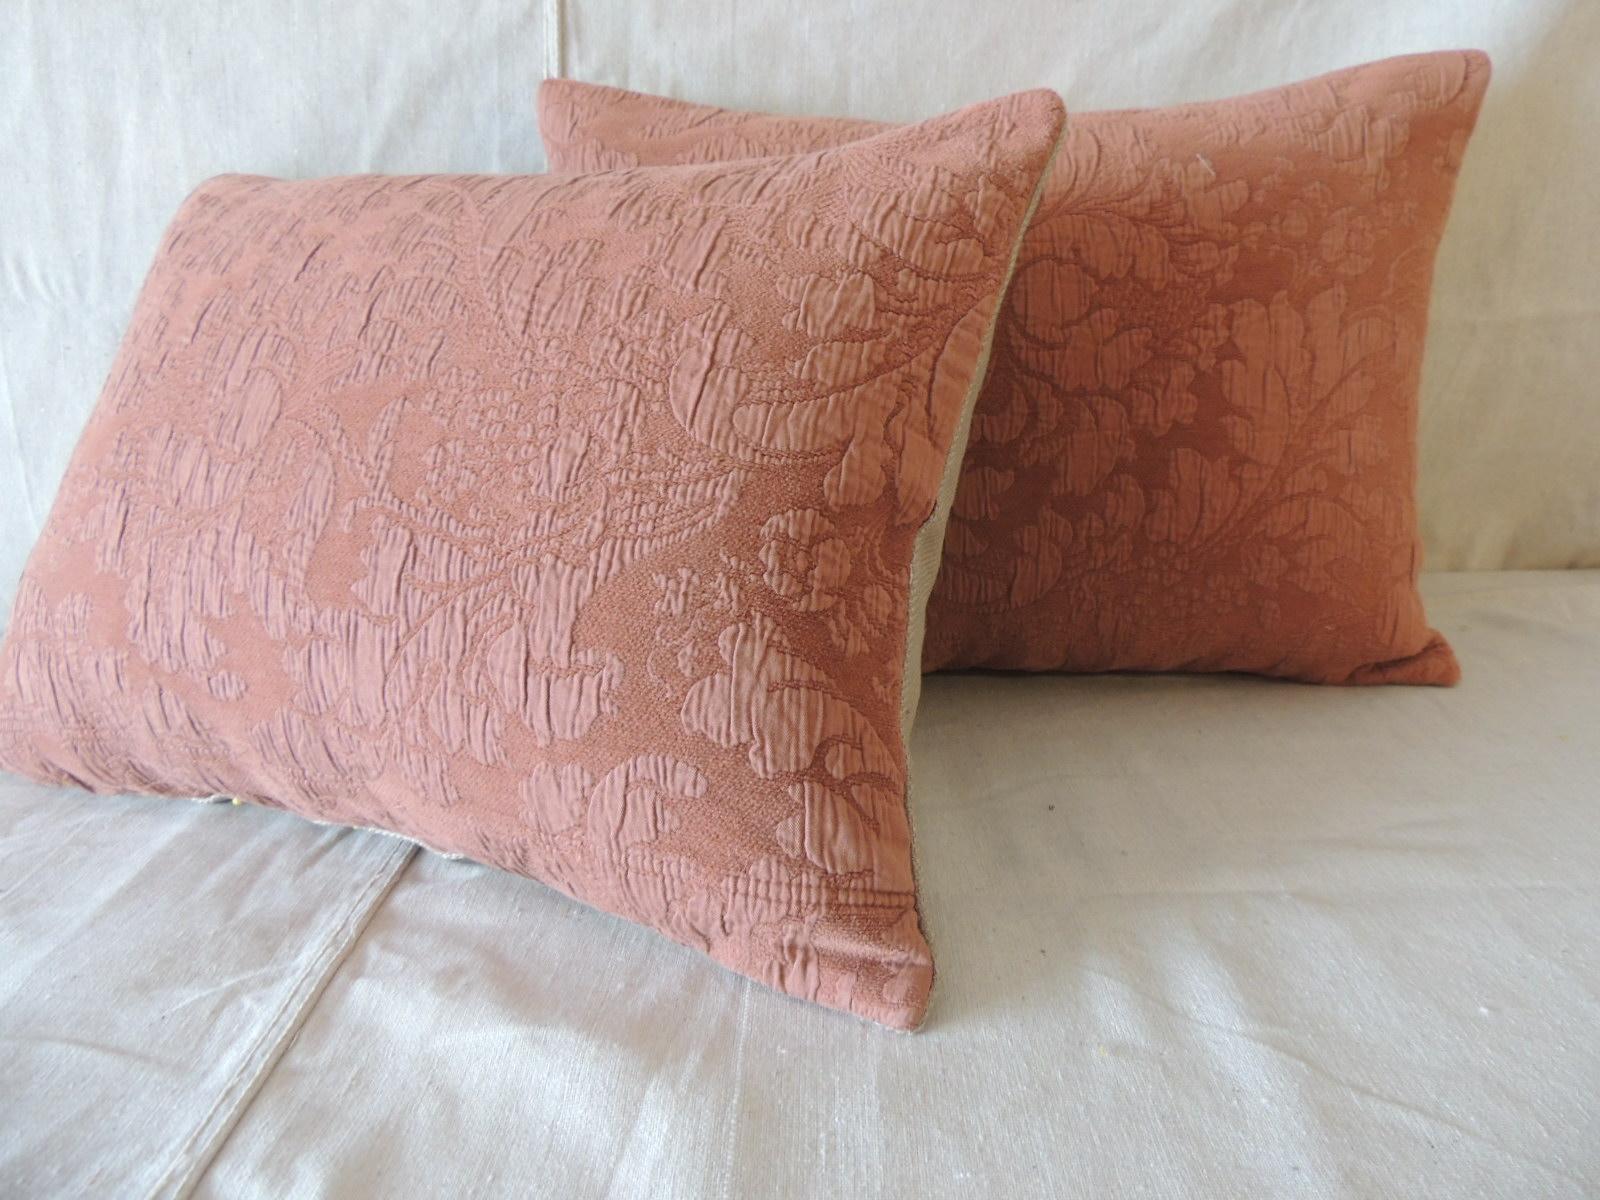 Hand-Crafted Pair of Modern Dusty Pink Tone-on-Tone Matelassé Bolster Decorative Pillows